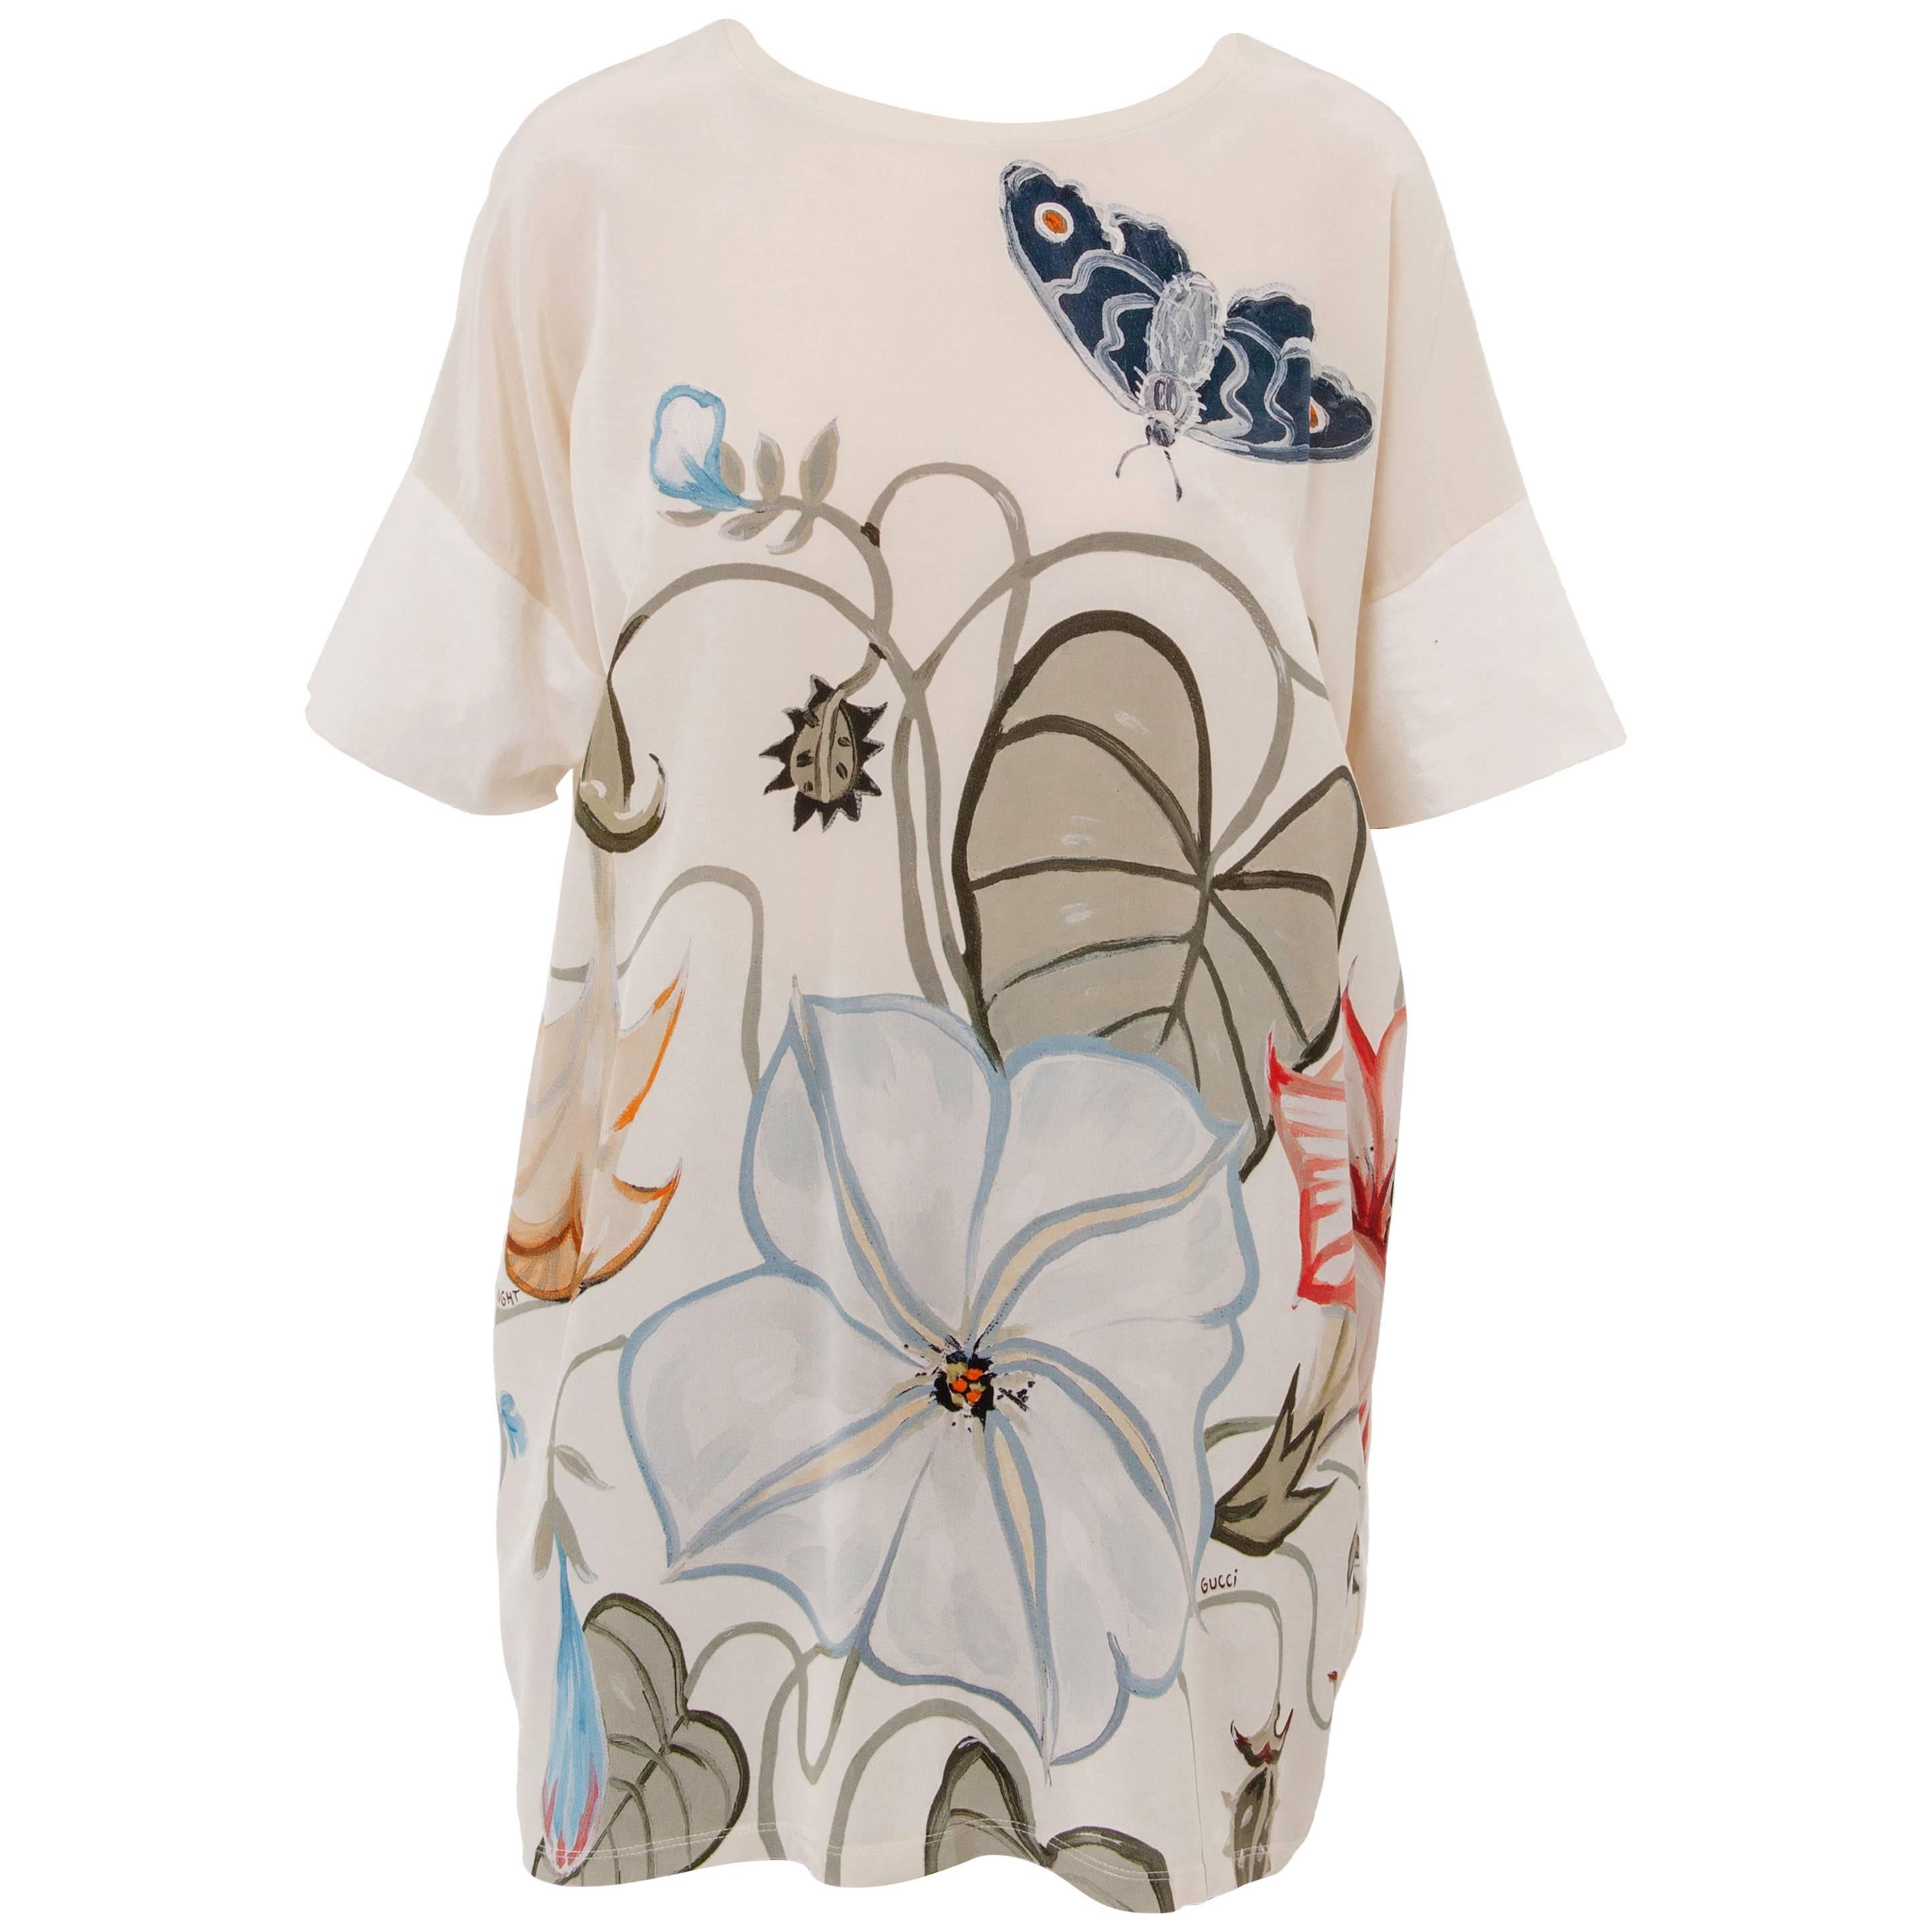 Gucci and Kris Knight Resort Ivory Silk Floral Butterfly Shirt, 2015 